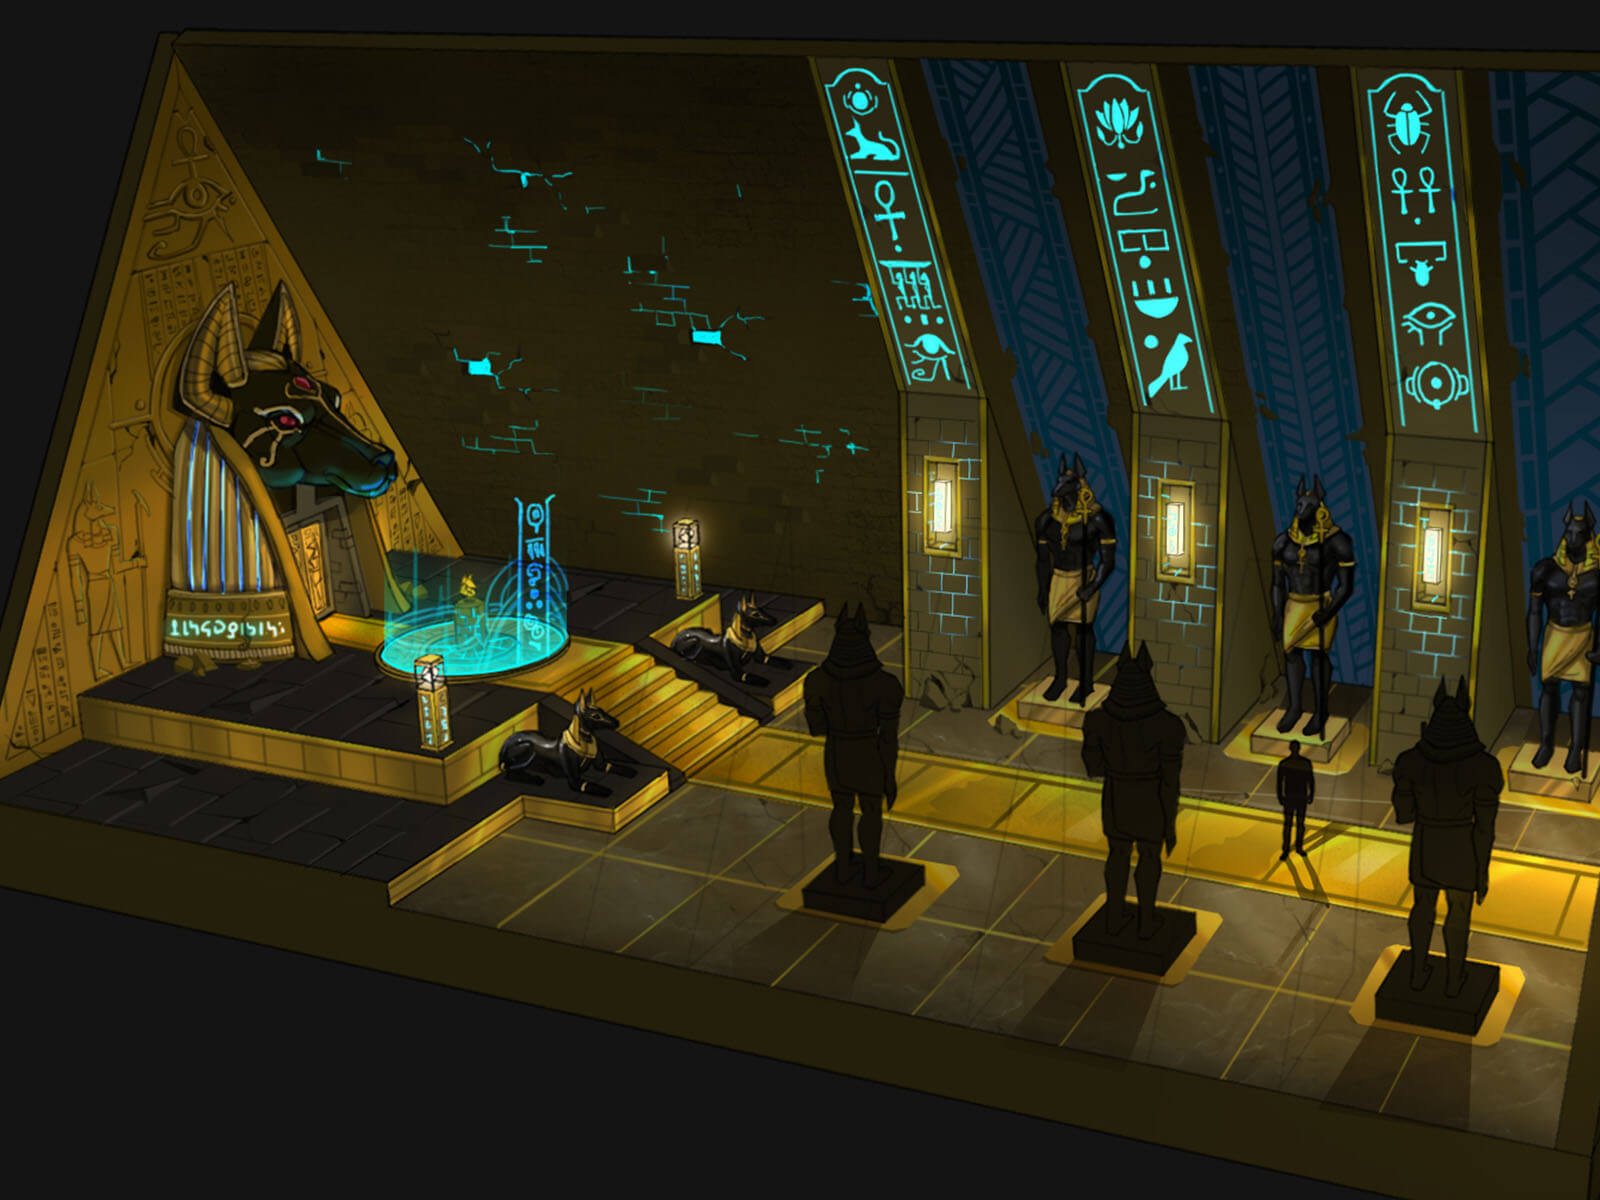 Painting of an ornate chamber adorned with Anubis and jackal statues.